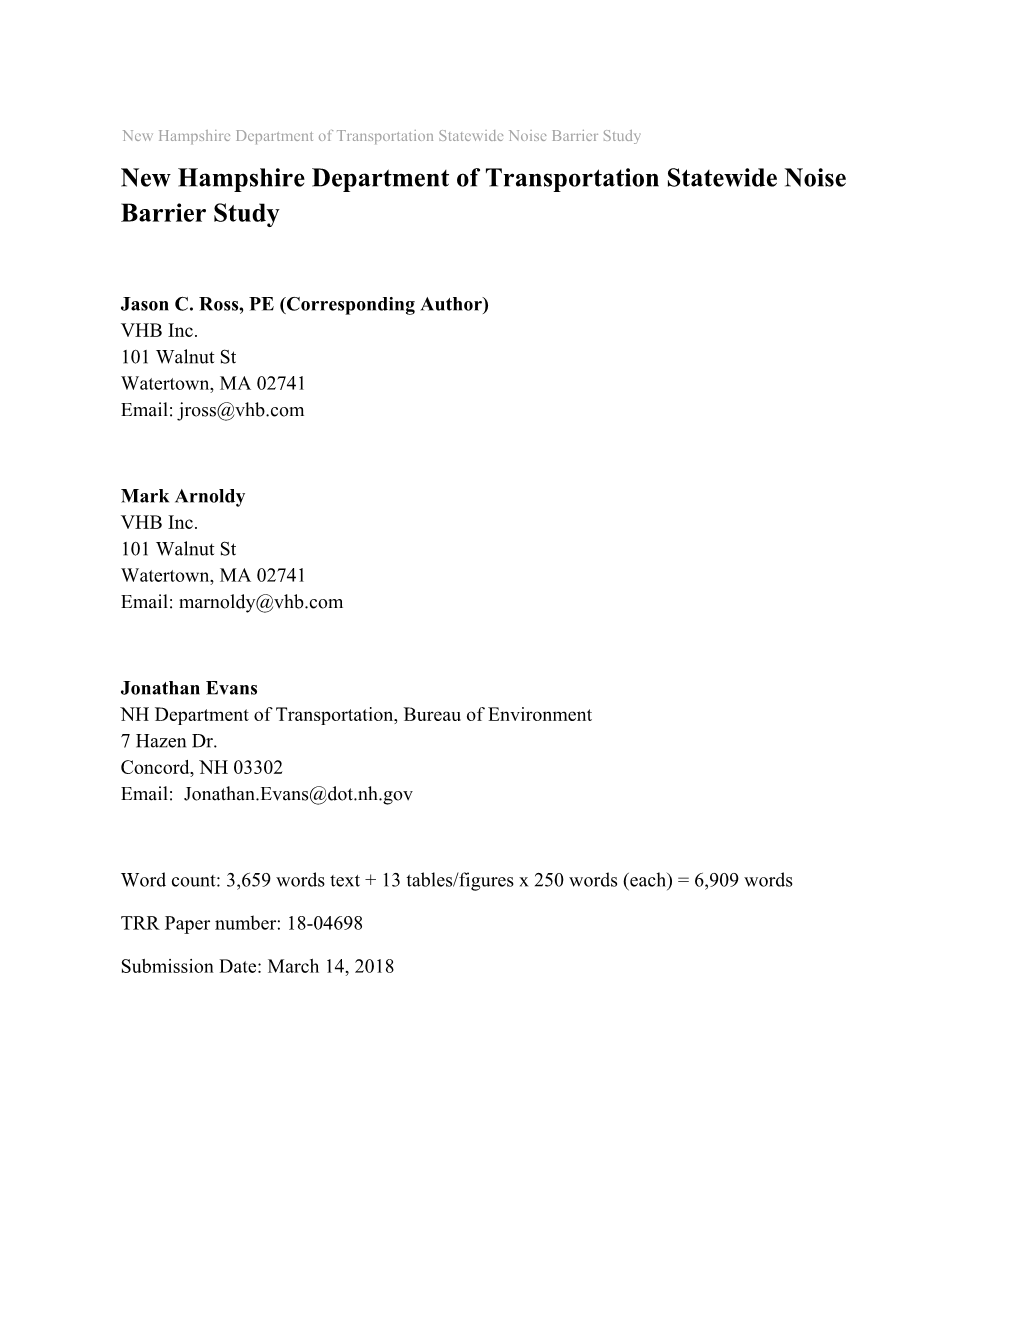 New Hampshire Department of Transportation Statewide Noise Barrier Study